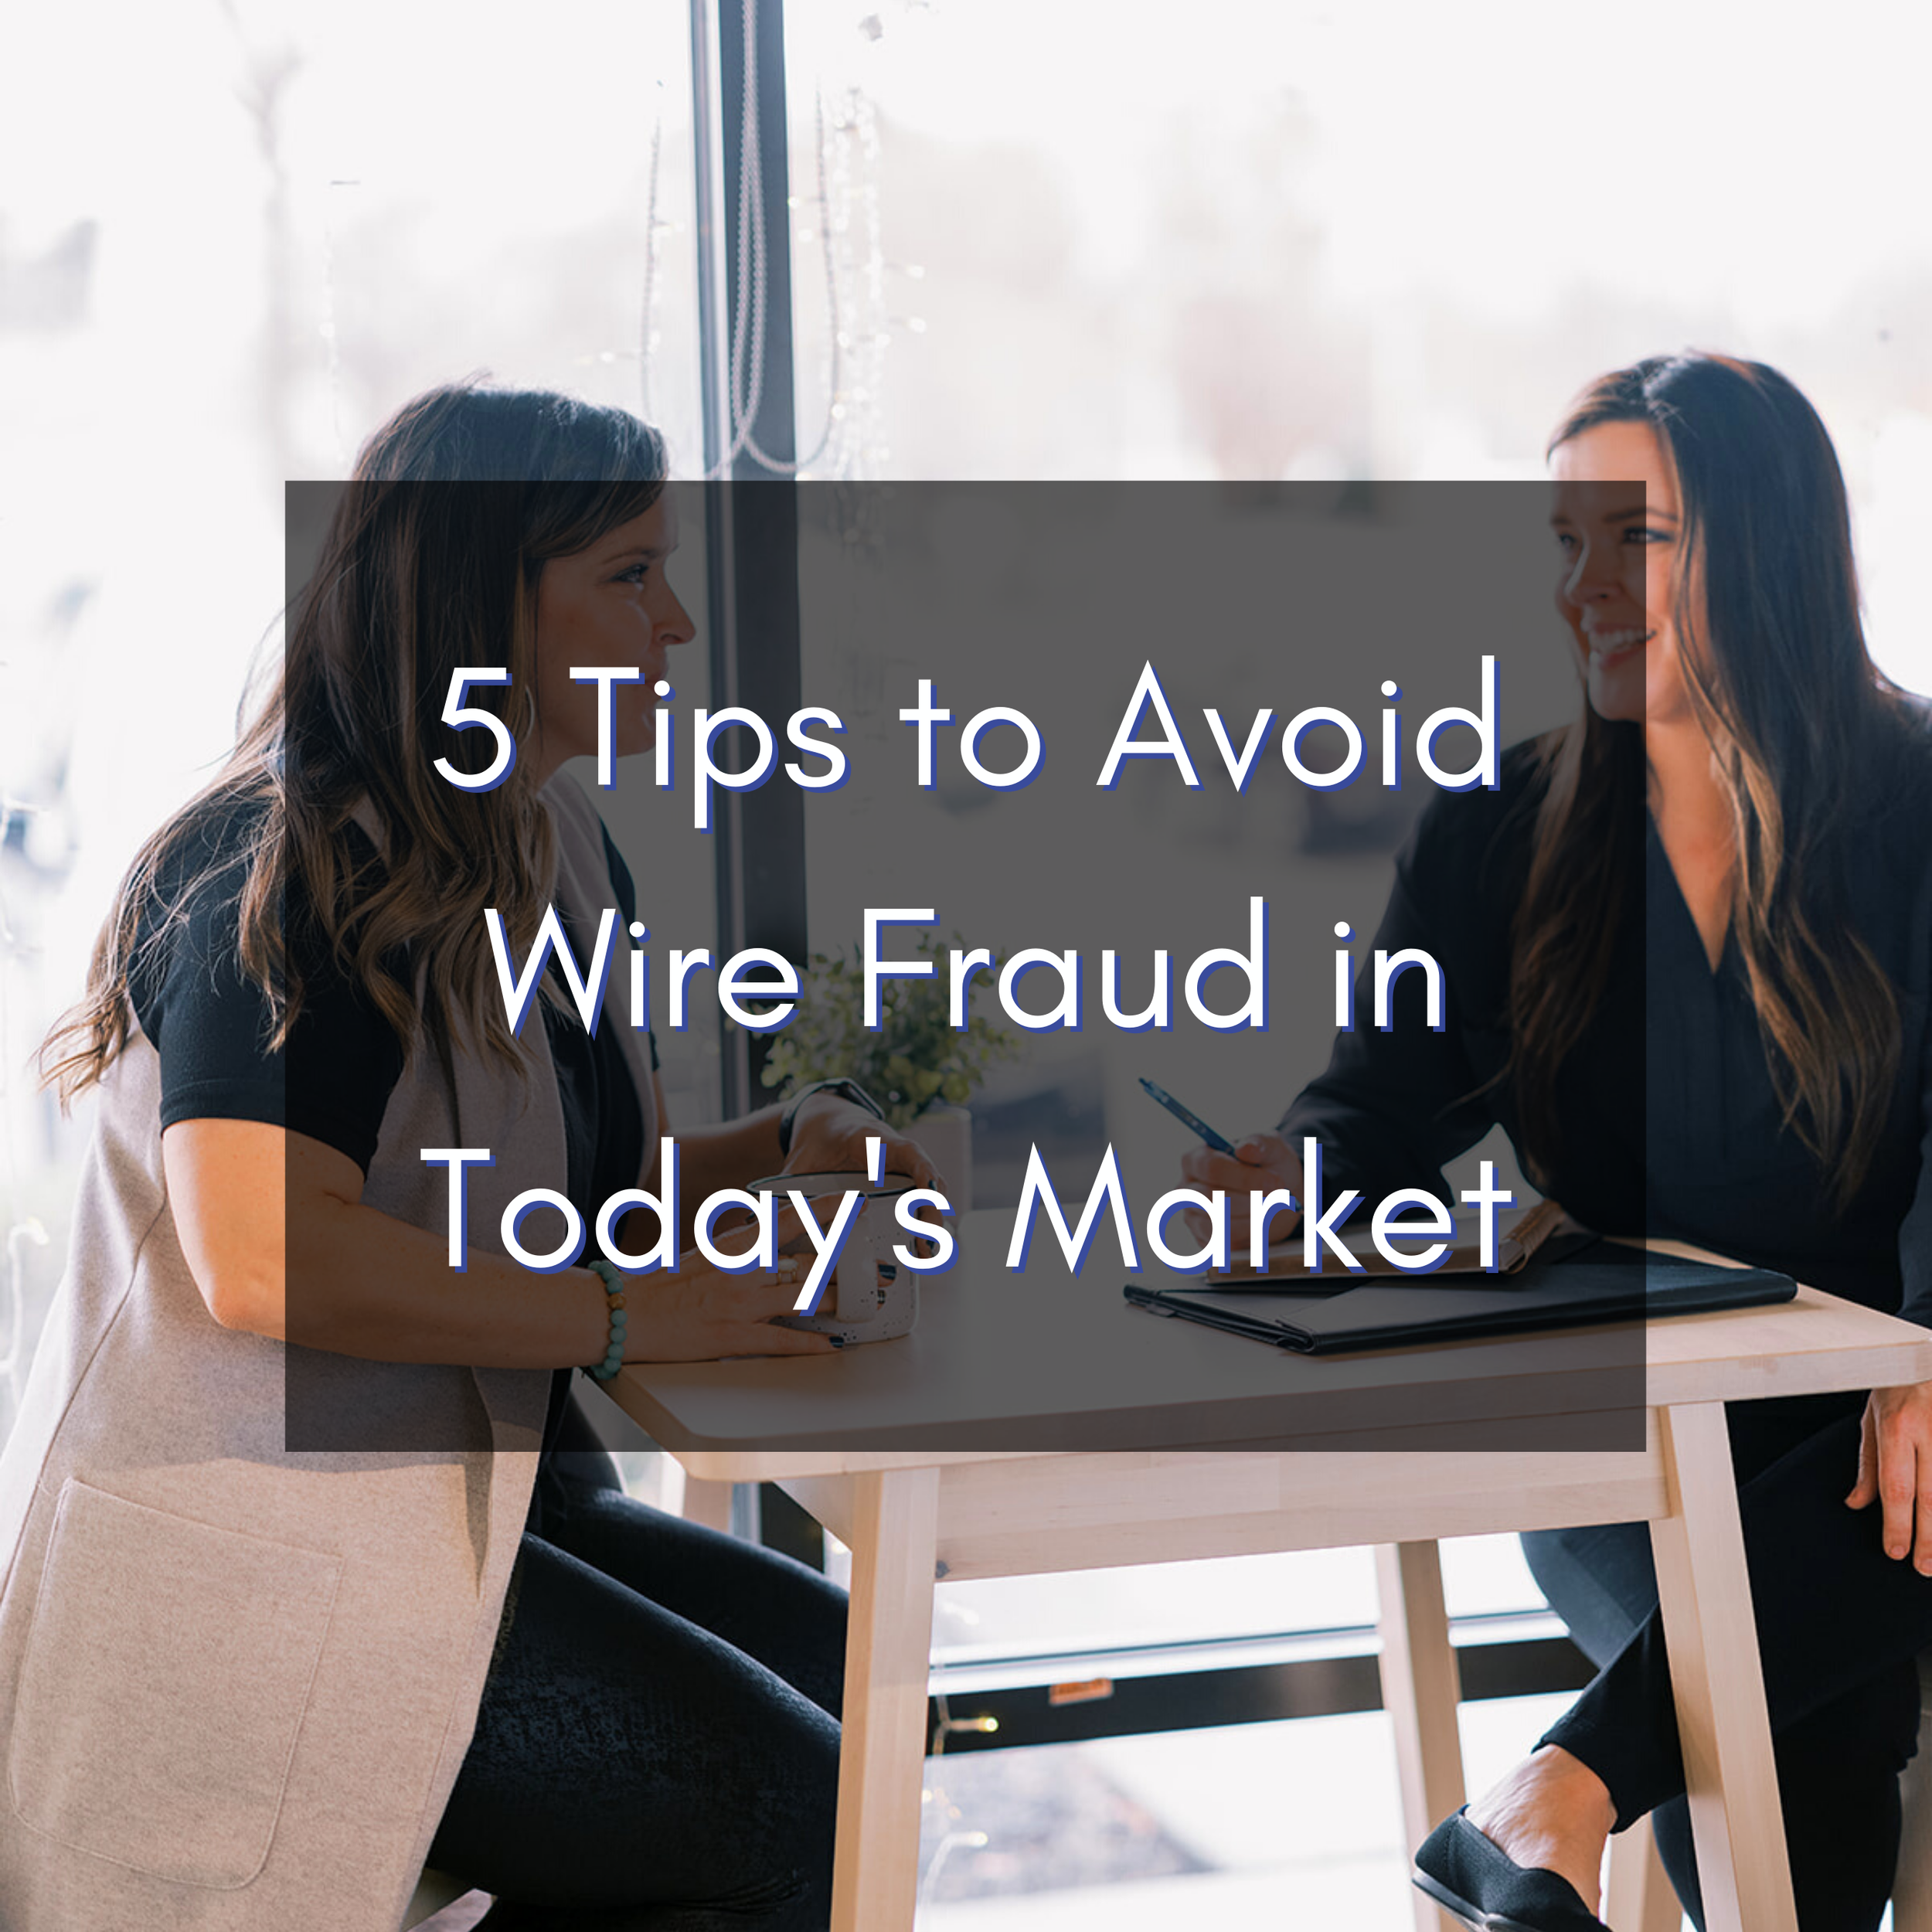 5 Tips to Avoid Wire Fraud in Today's Market